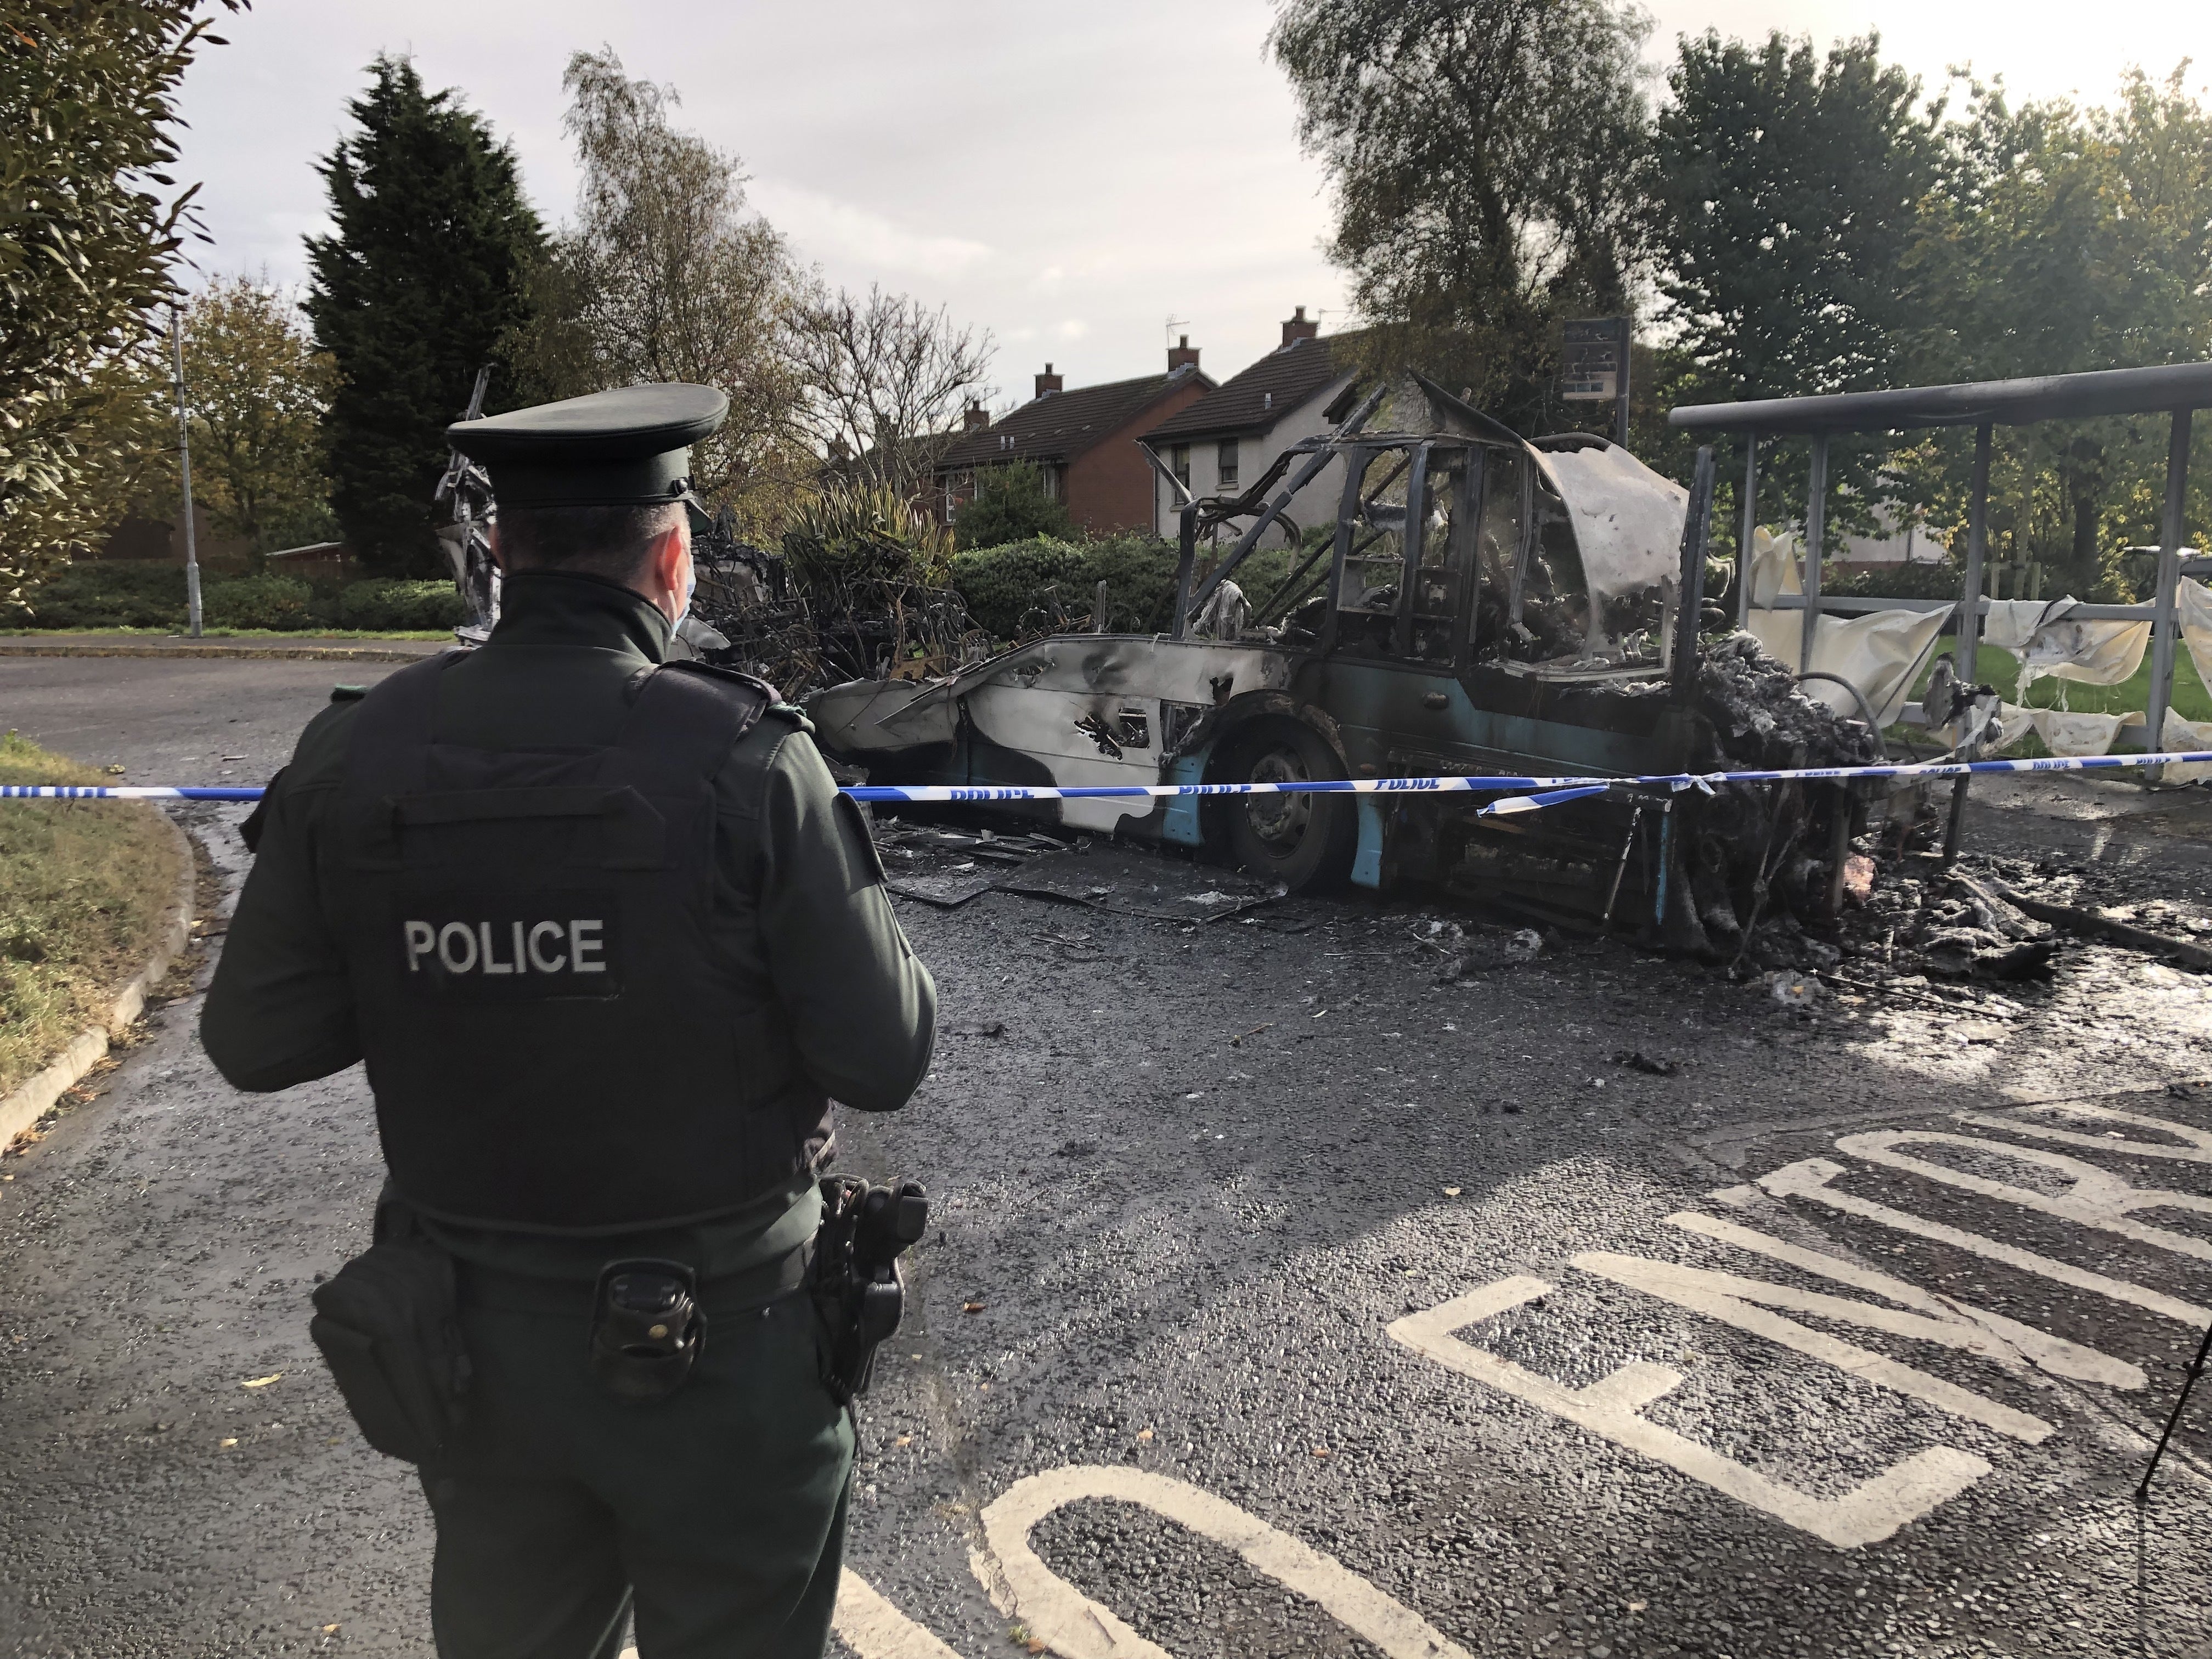 The scene on Abbott Drive in Newtownards near Belfast, after a bus was hijacked and set alight in an attack politicians have linked to loyalist opposition to Brexit’s Northern Ireland Protocol (David Young/PA)